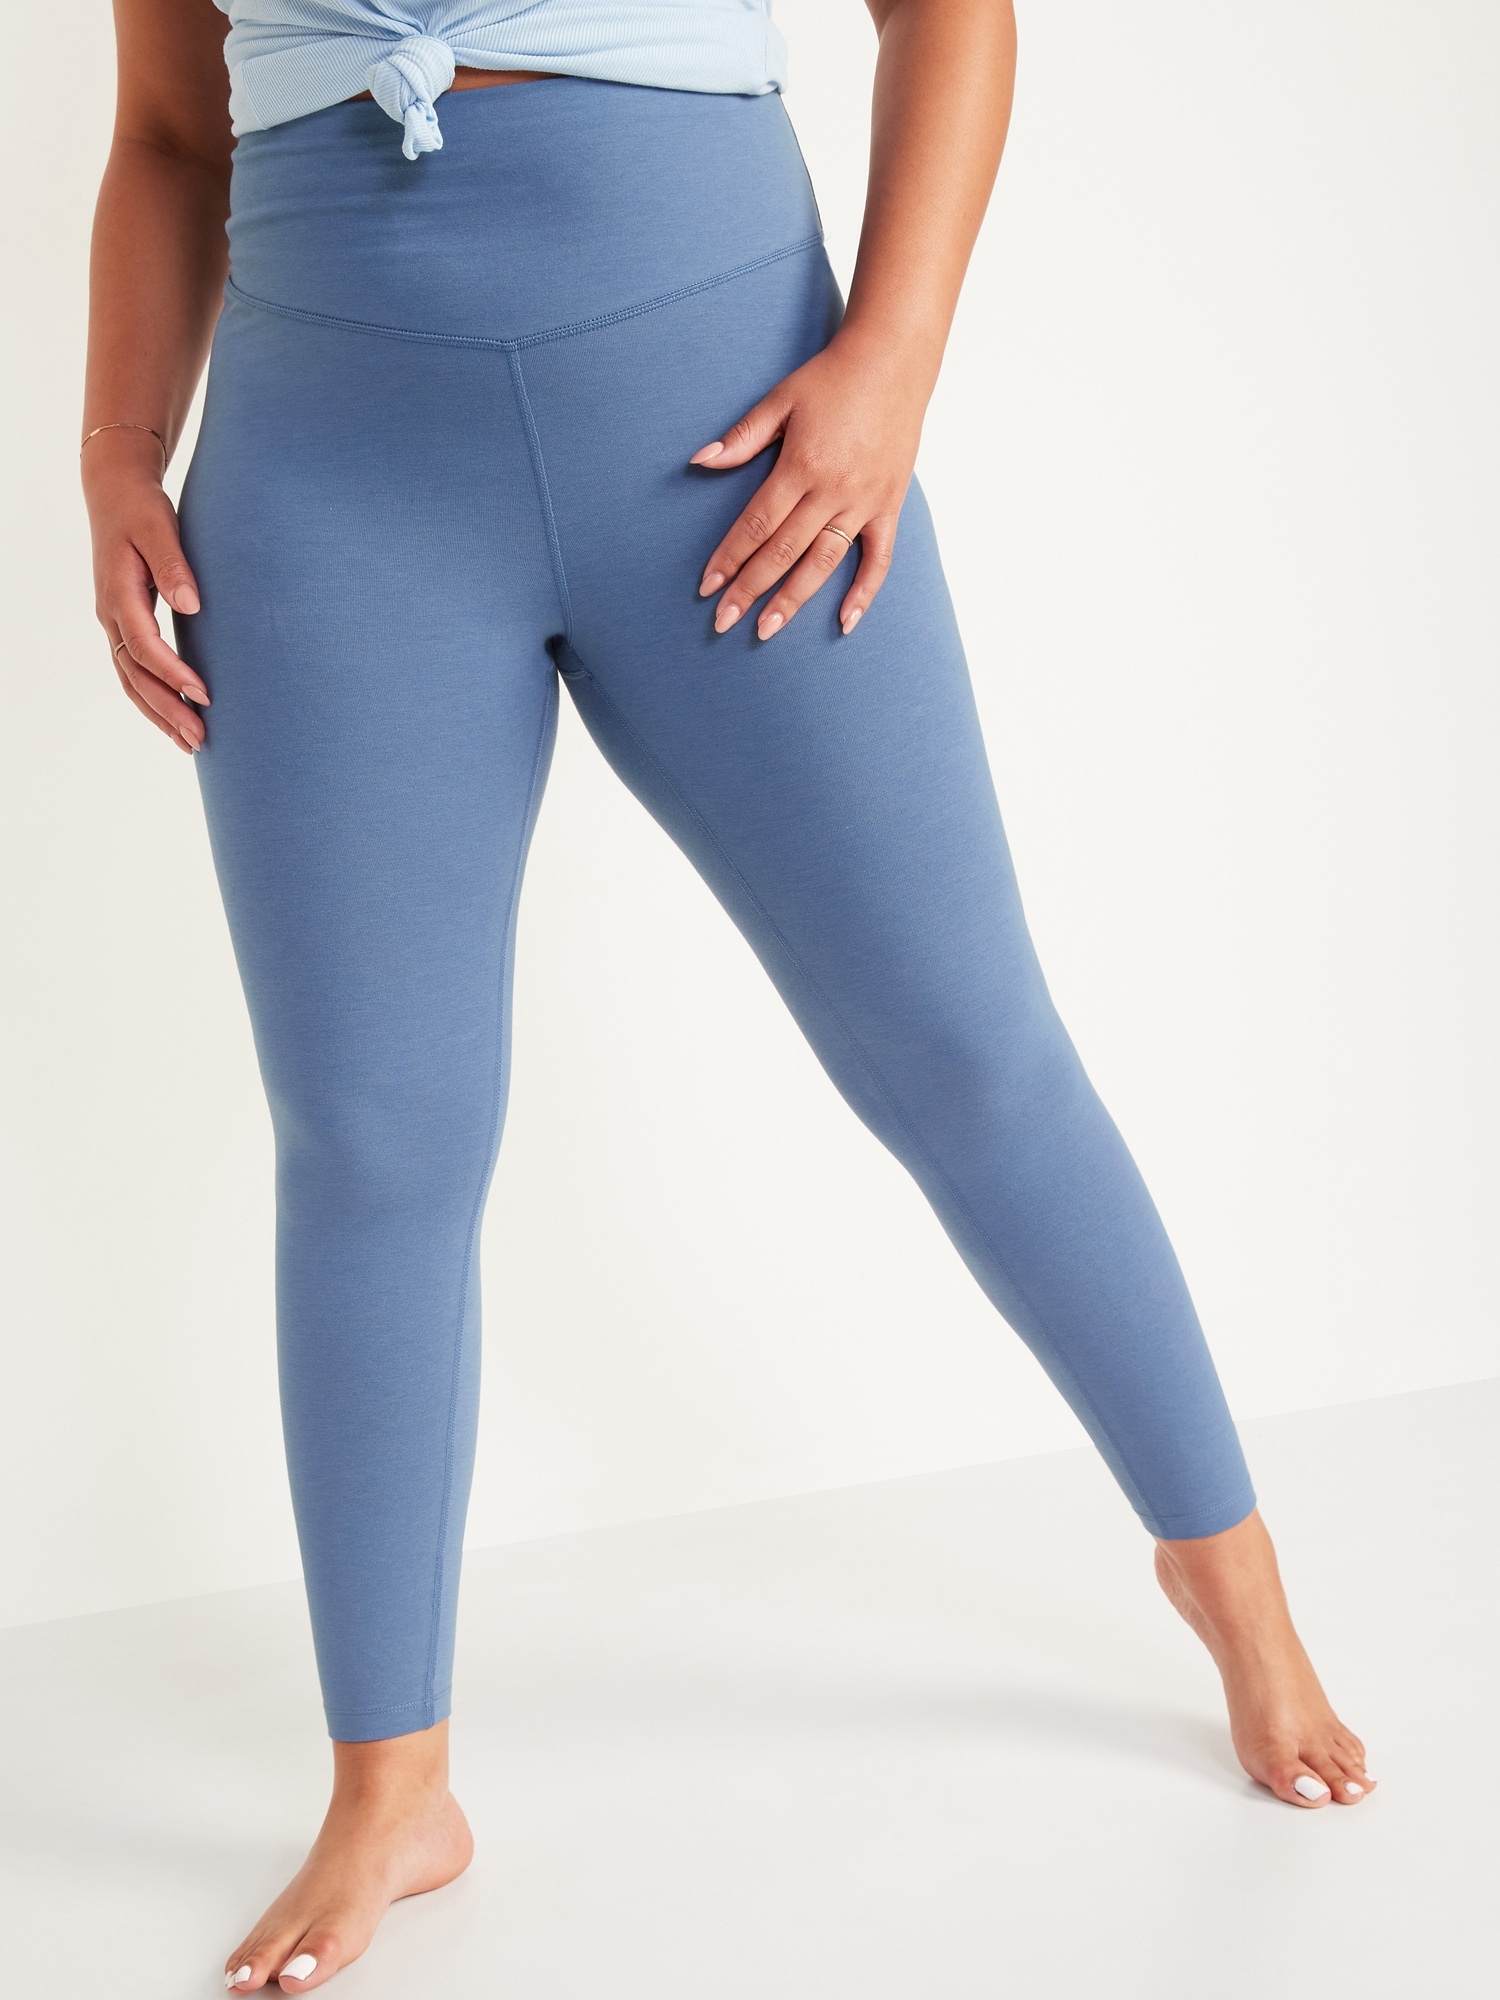 NEW OLD NAVY LEGGING TRY ON REVIEW / EXTRA HIGH WAISTED POWERCHILL  CROSSOVER 7/8 FOR WOMEN 